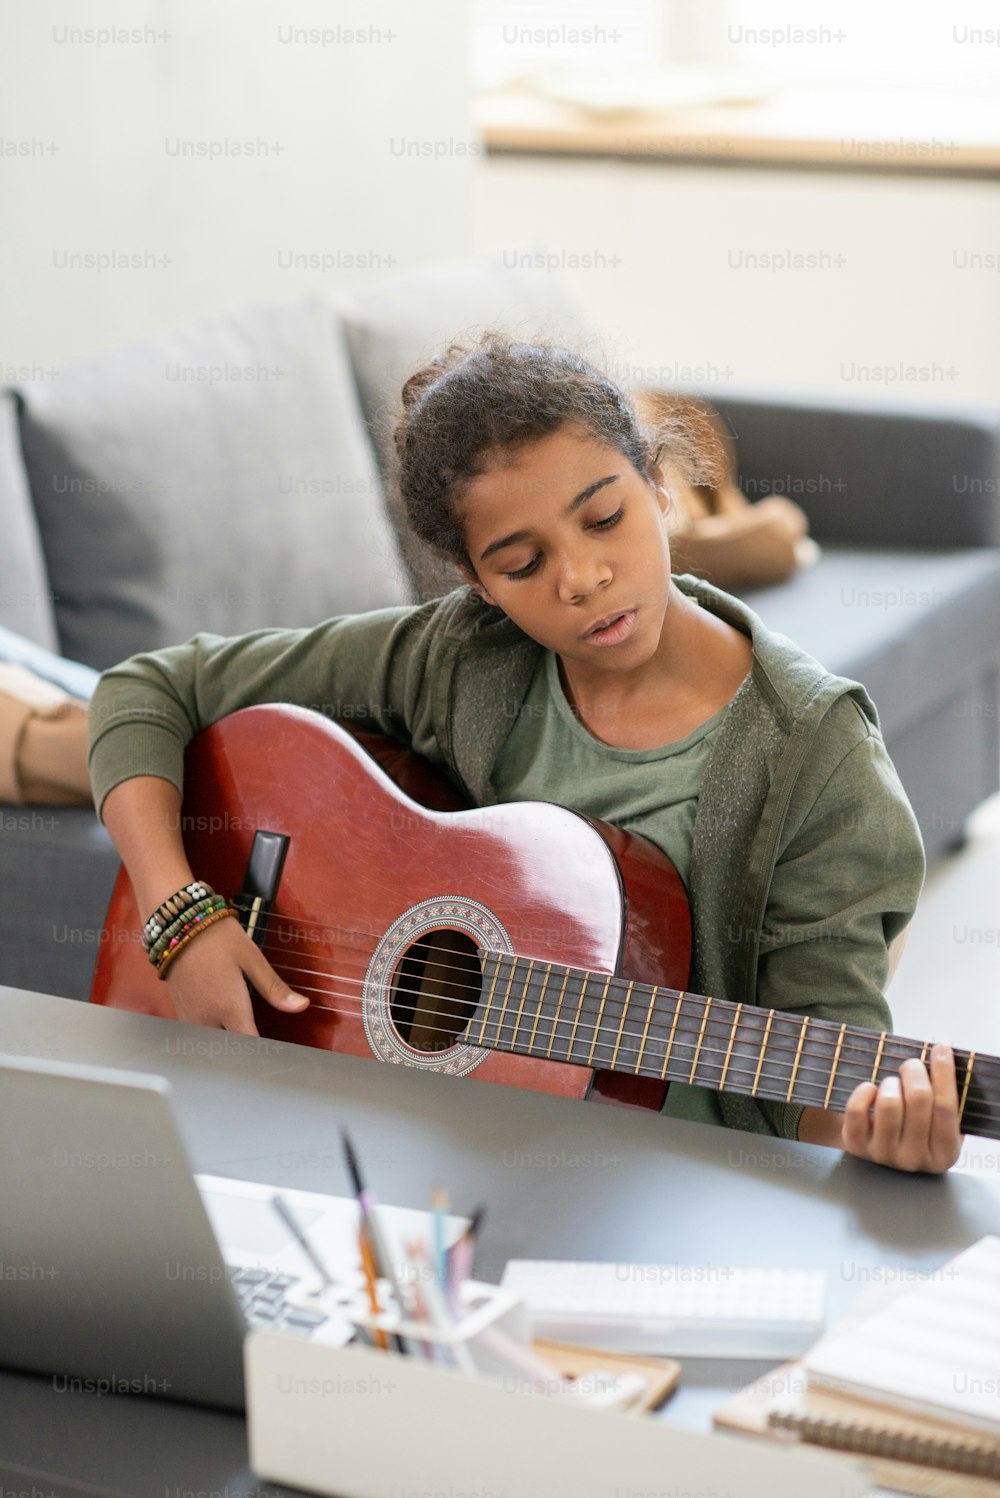 Cute preteenage girl with acoustic guitar playing in front of laptop during online lesson in home environment